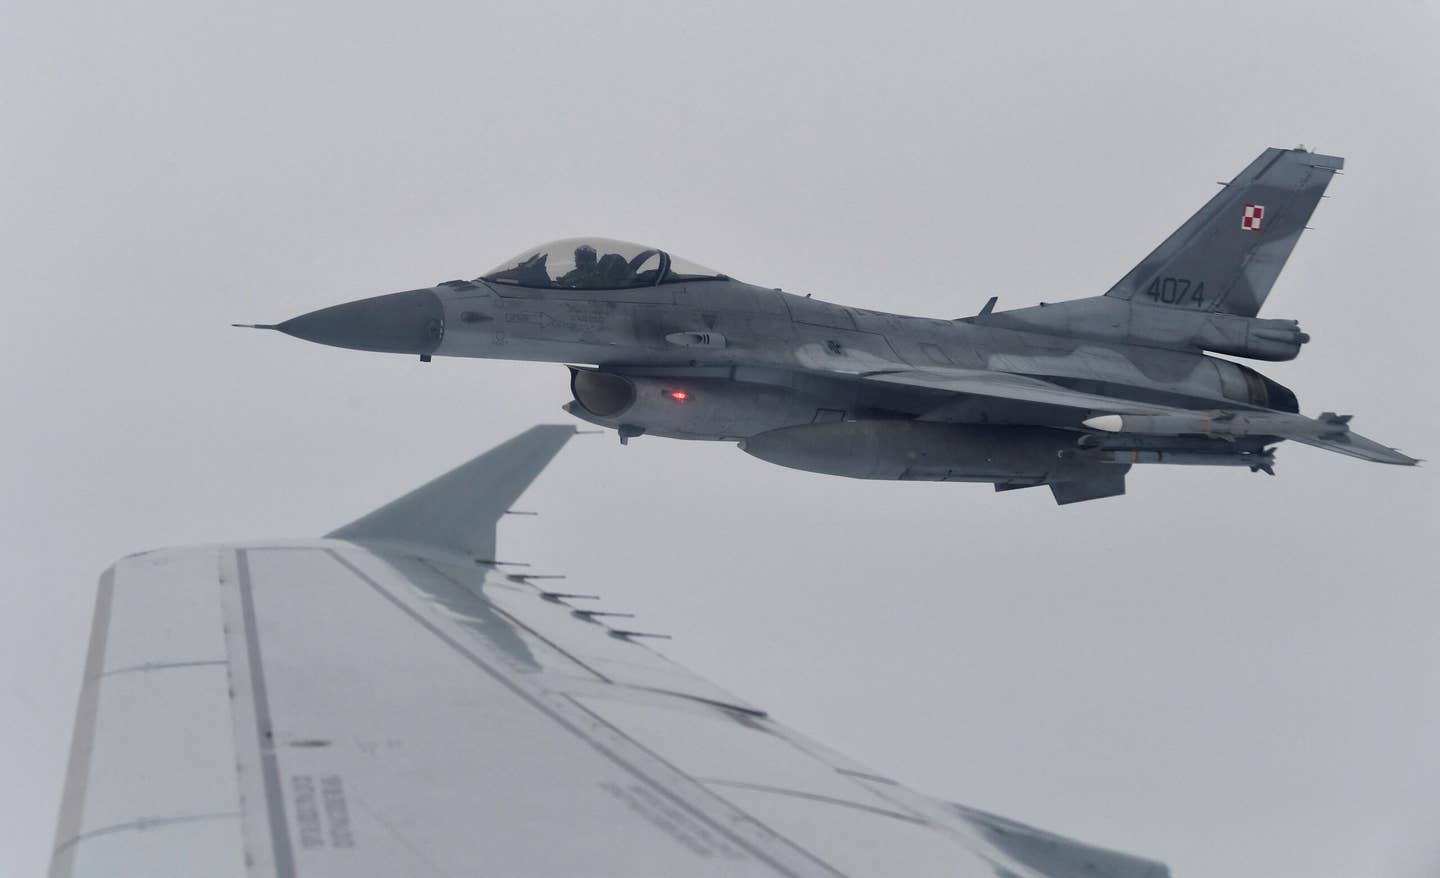 A Polish Air Force F-16C during a NATO Baltic Air Policing drill simulating the interception of a civilian flight near Siauliai Airport in Lithuania, in 2020. <em>Photo by JOHN THYS/AFP via Getty Images</em>